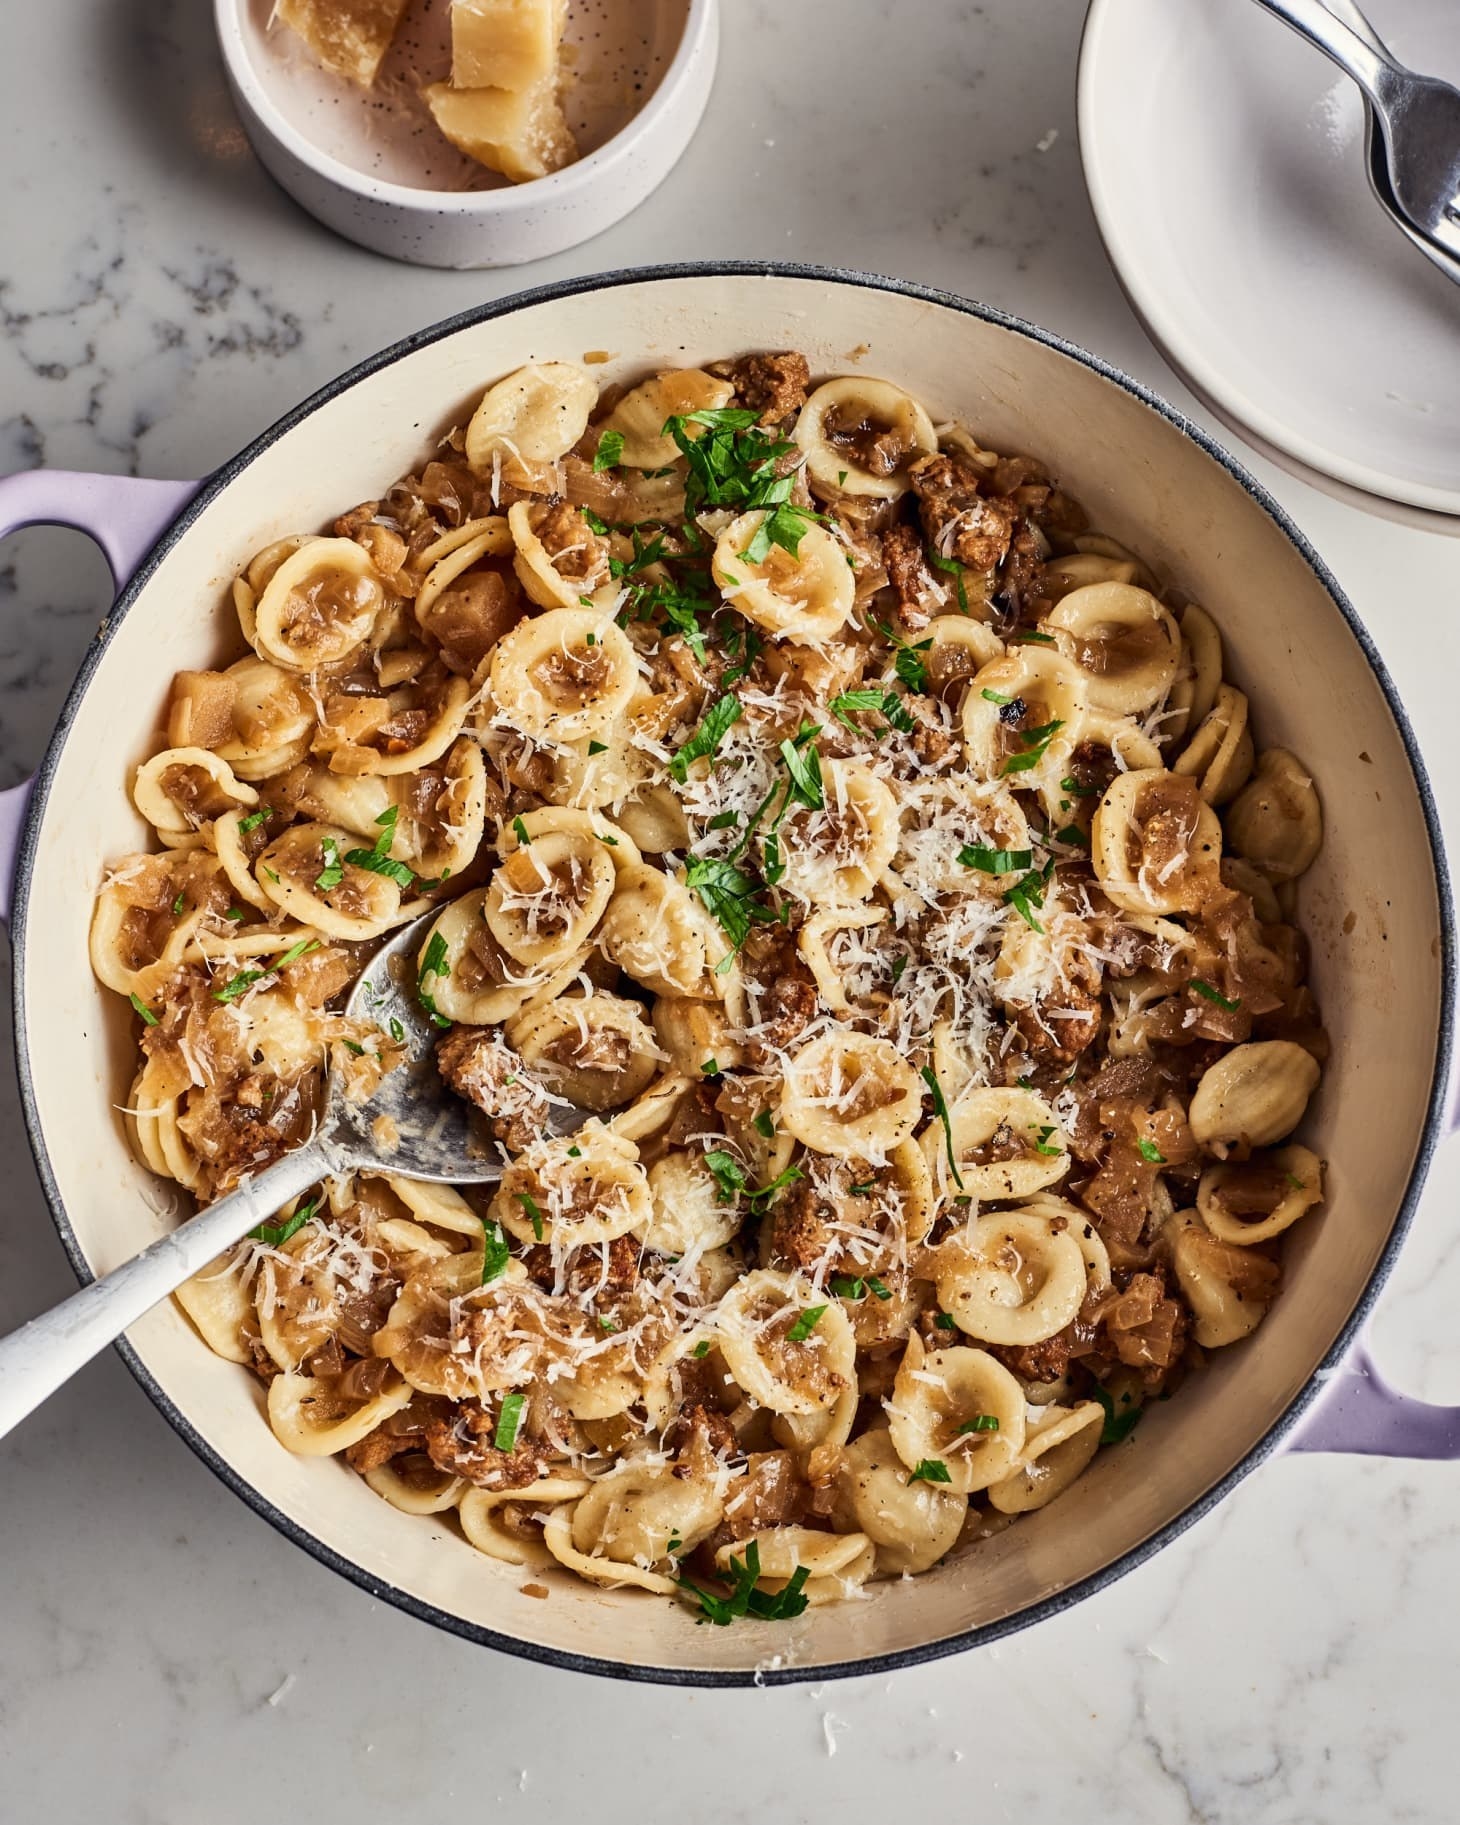 Caramelized Onion, Apple, and Sausage Pasta